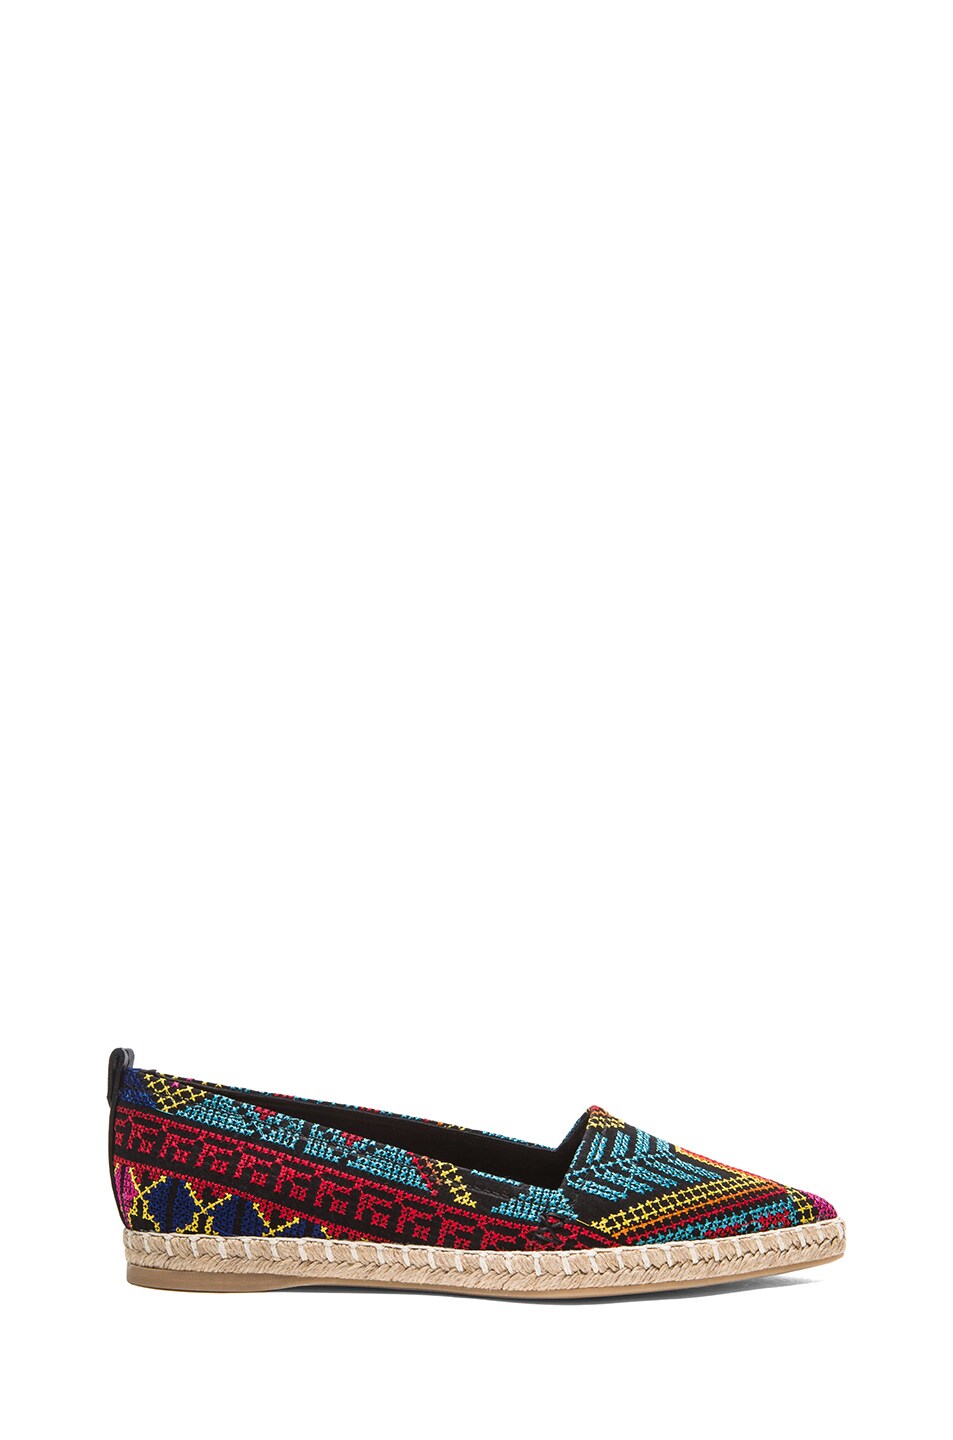 Nicholas Kirkwood Mexican Embroidered Twill Espadrilles in Blue ...